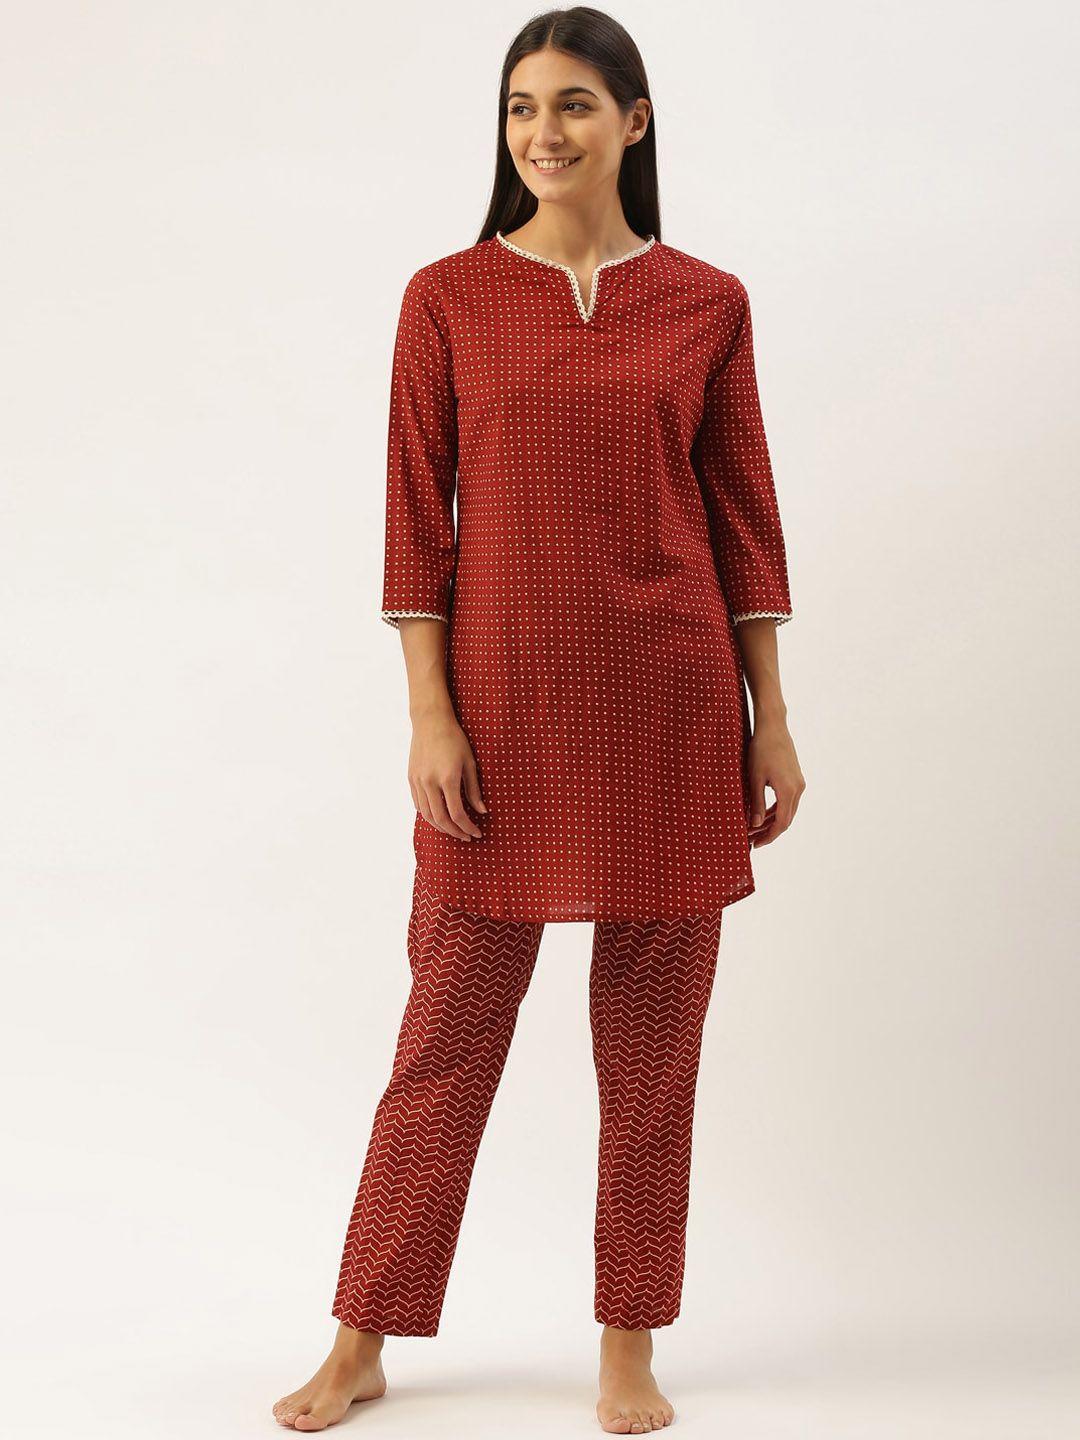 bannos-swagger-polka-dots-printed-round-neck-pure-cotton-night-suit